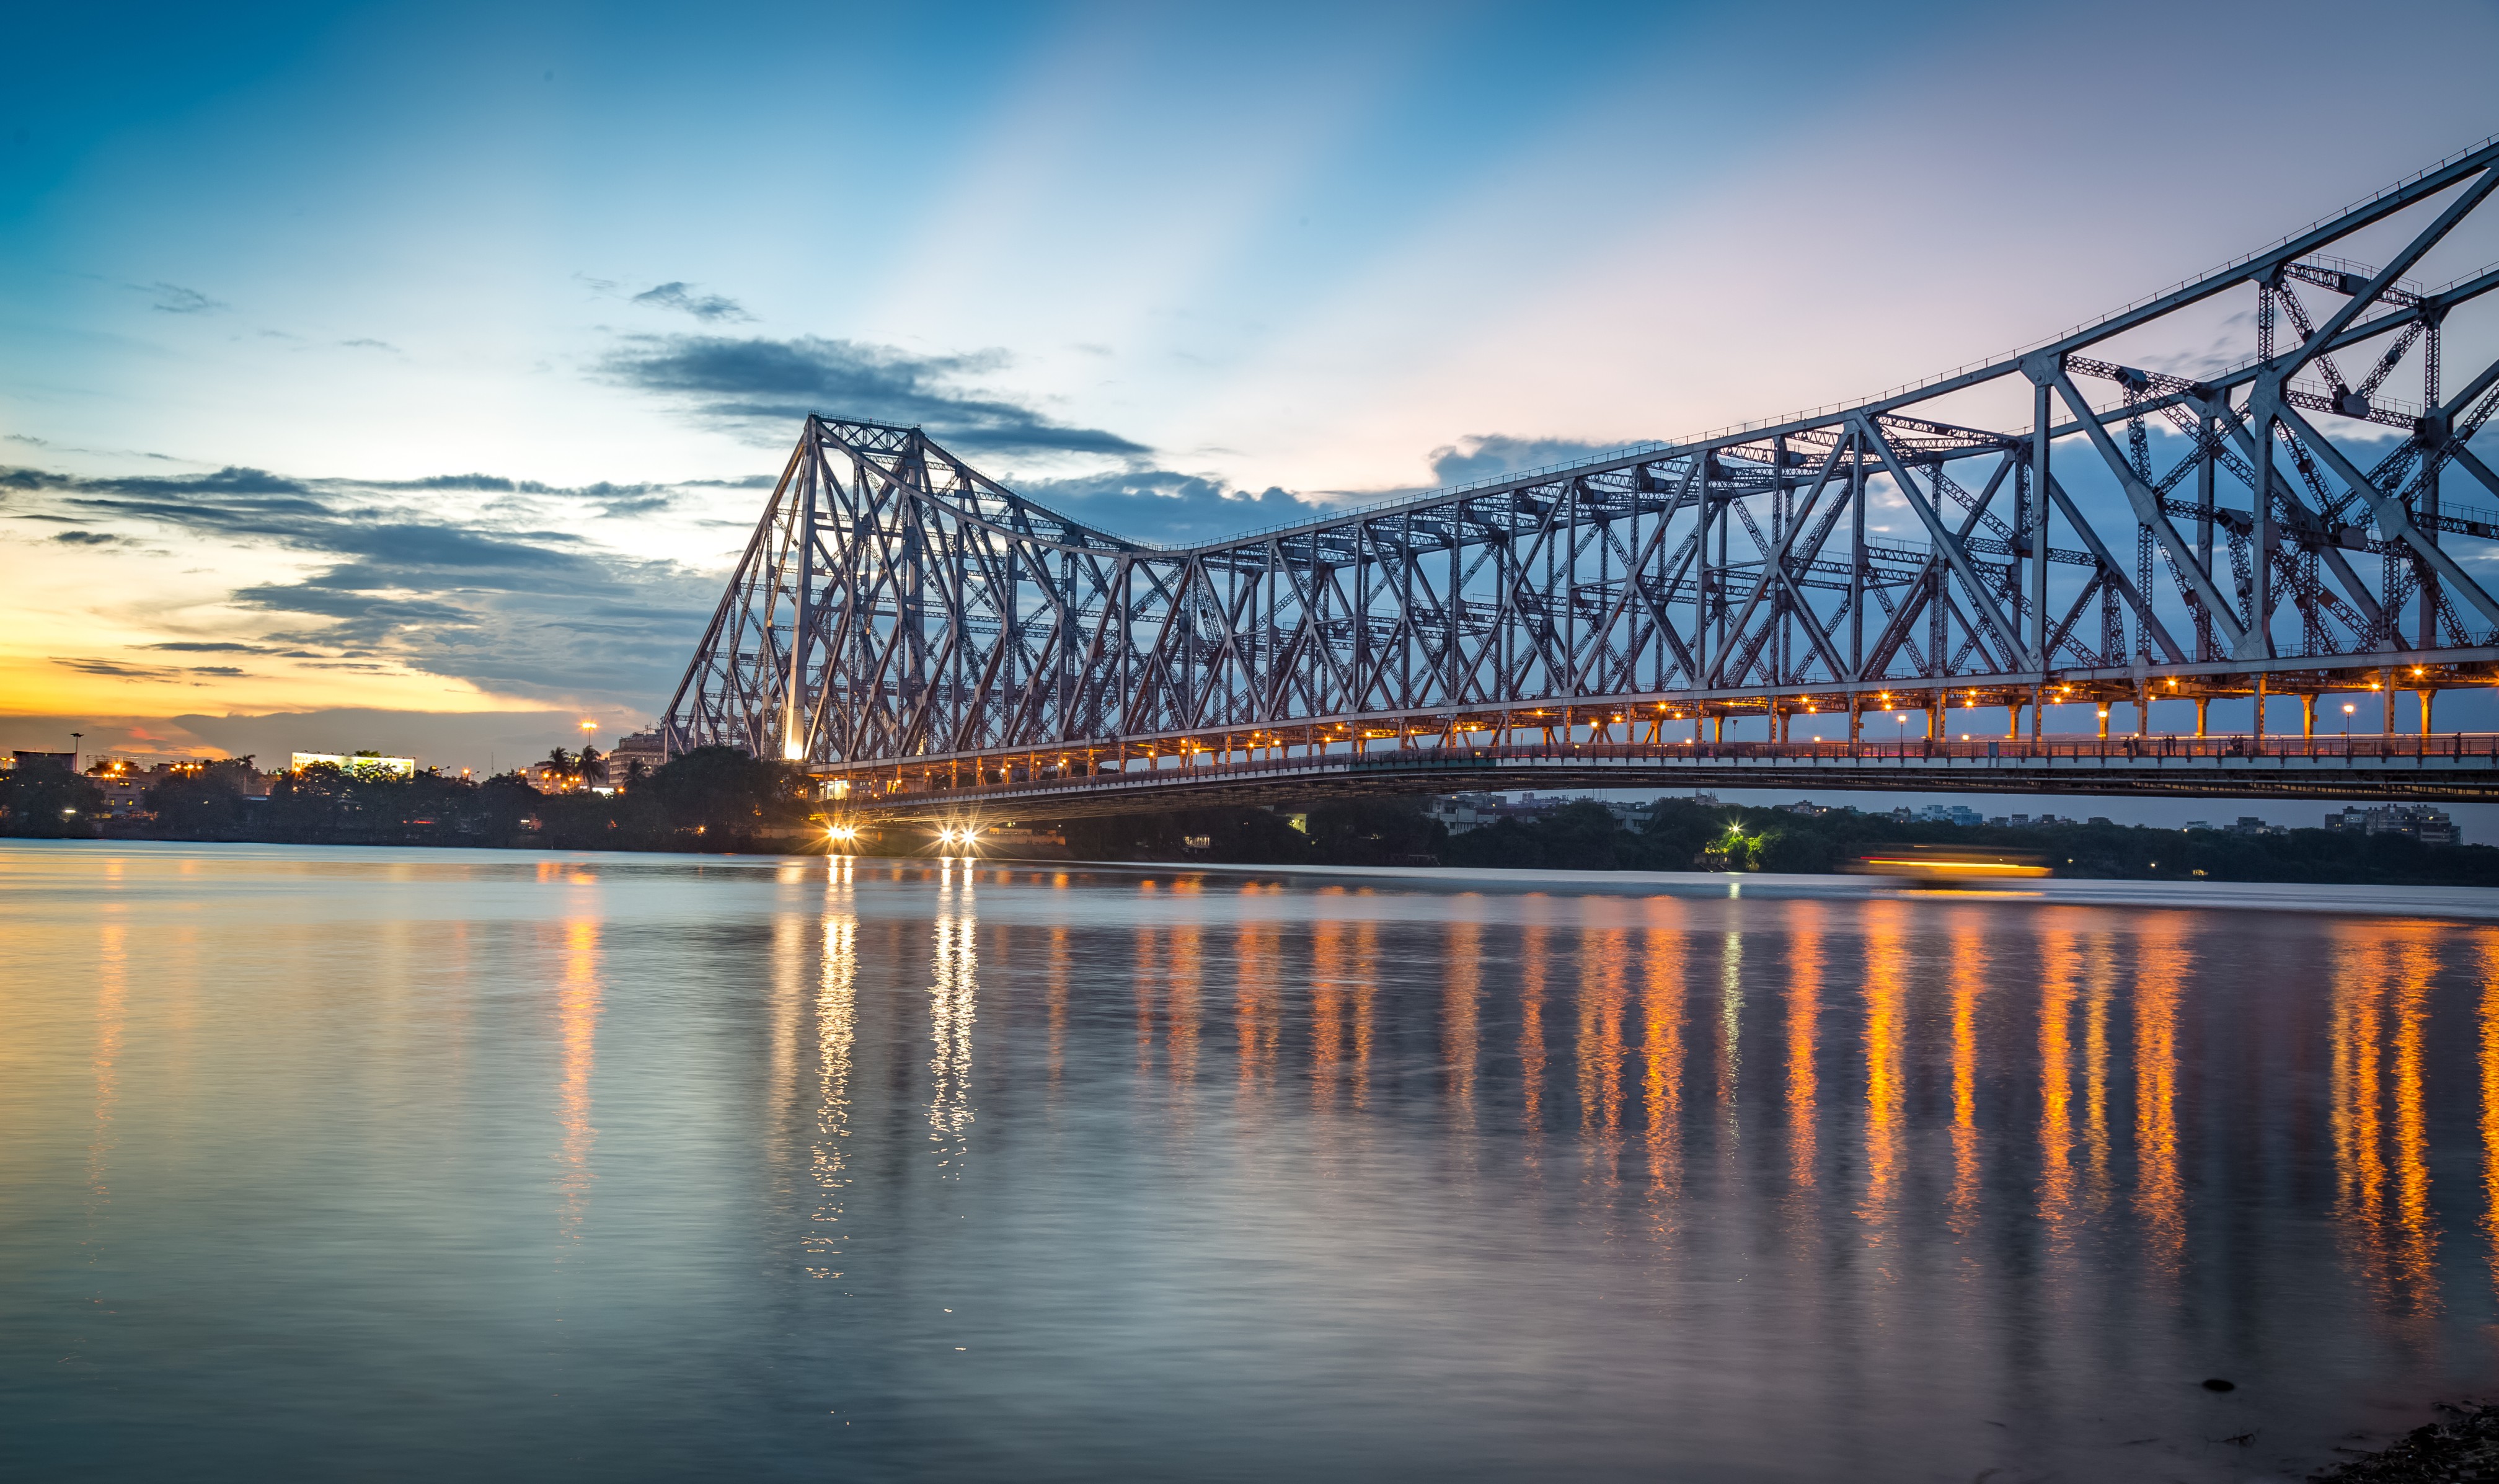 Howrah bridge - The historic cantilever bridge on the river Hooghly with twilight sky.